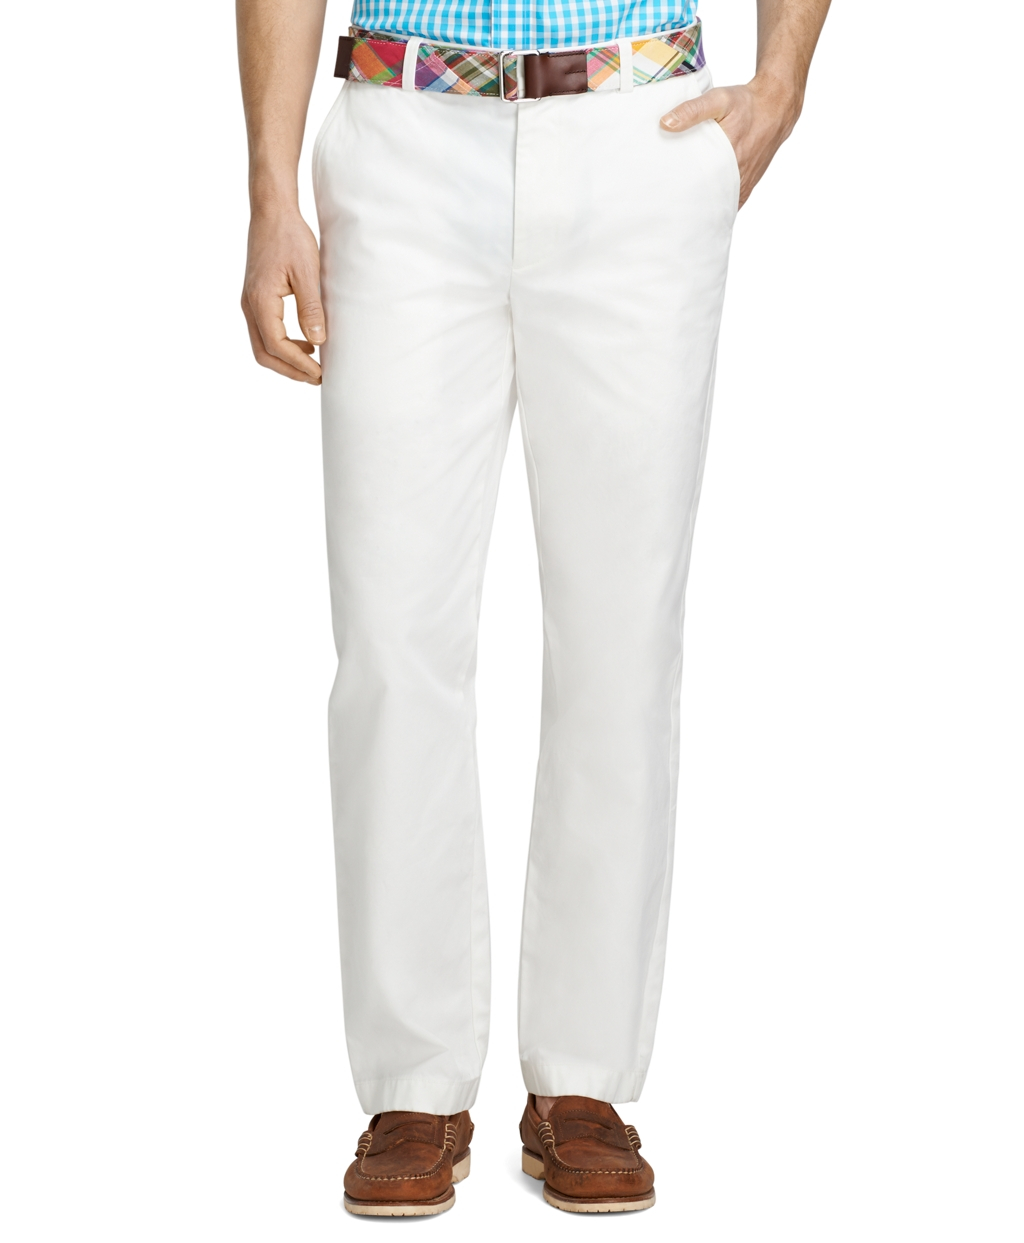 Lyst - Brooks Brothers Clark Fit Garment-dyed Chinos in White for Men